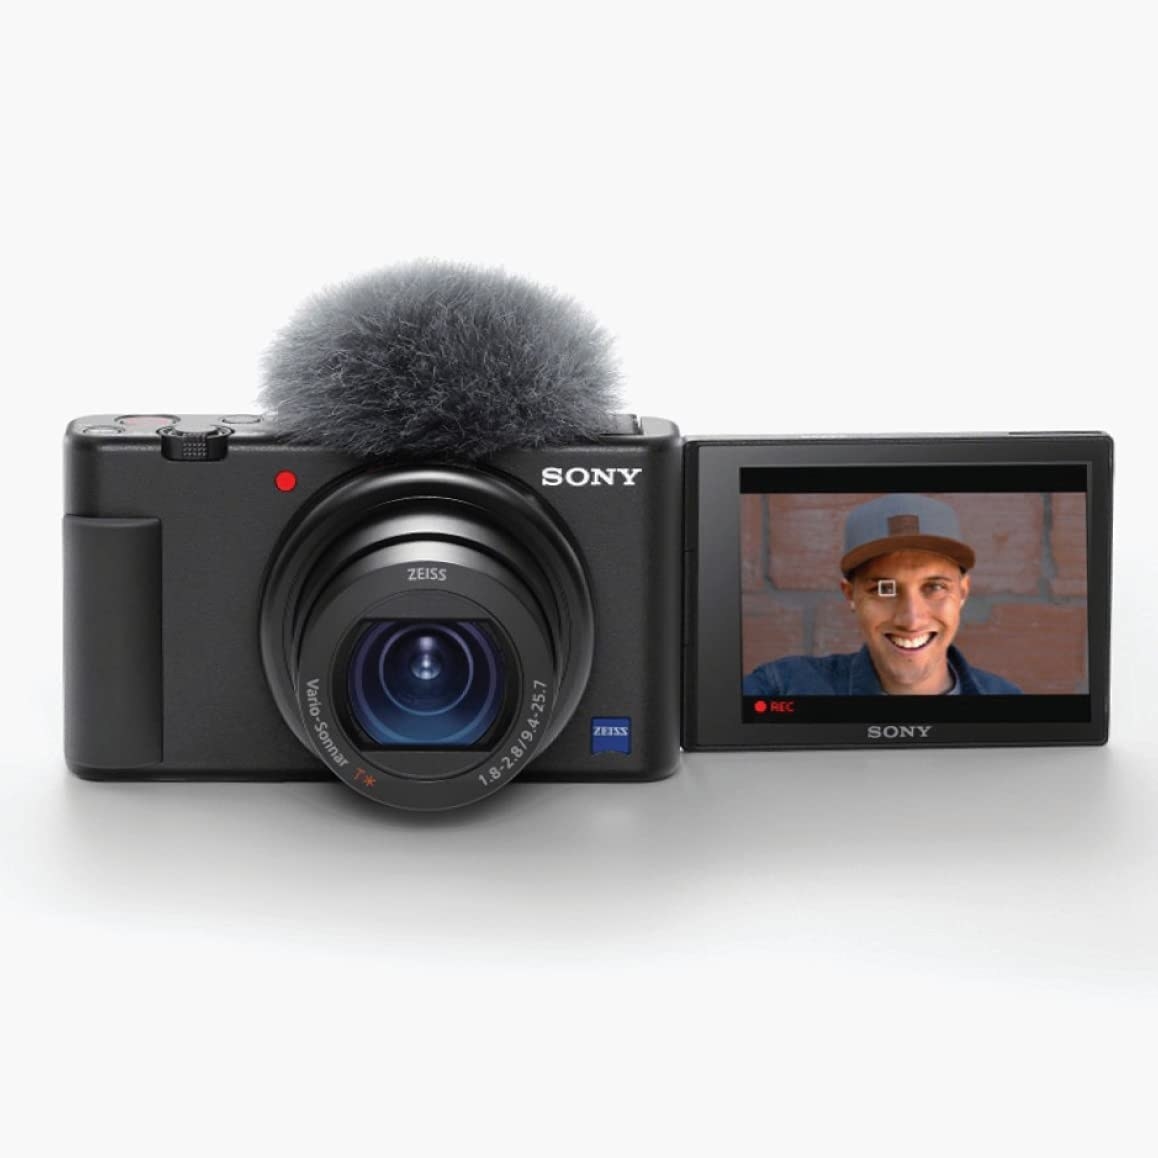 Black compact camera with screen flipped around for selfies or recording vlogs